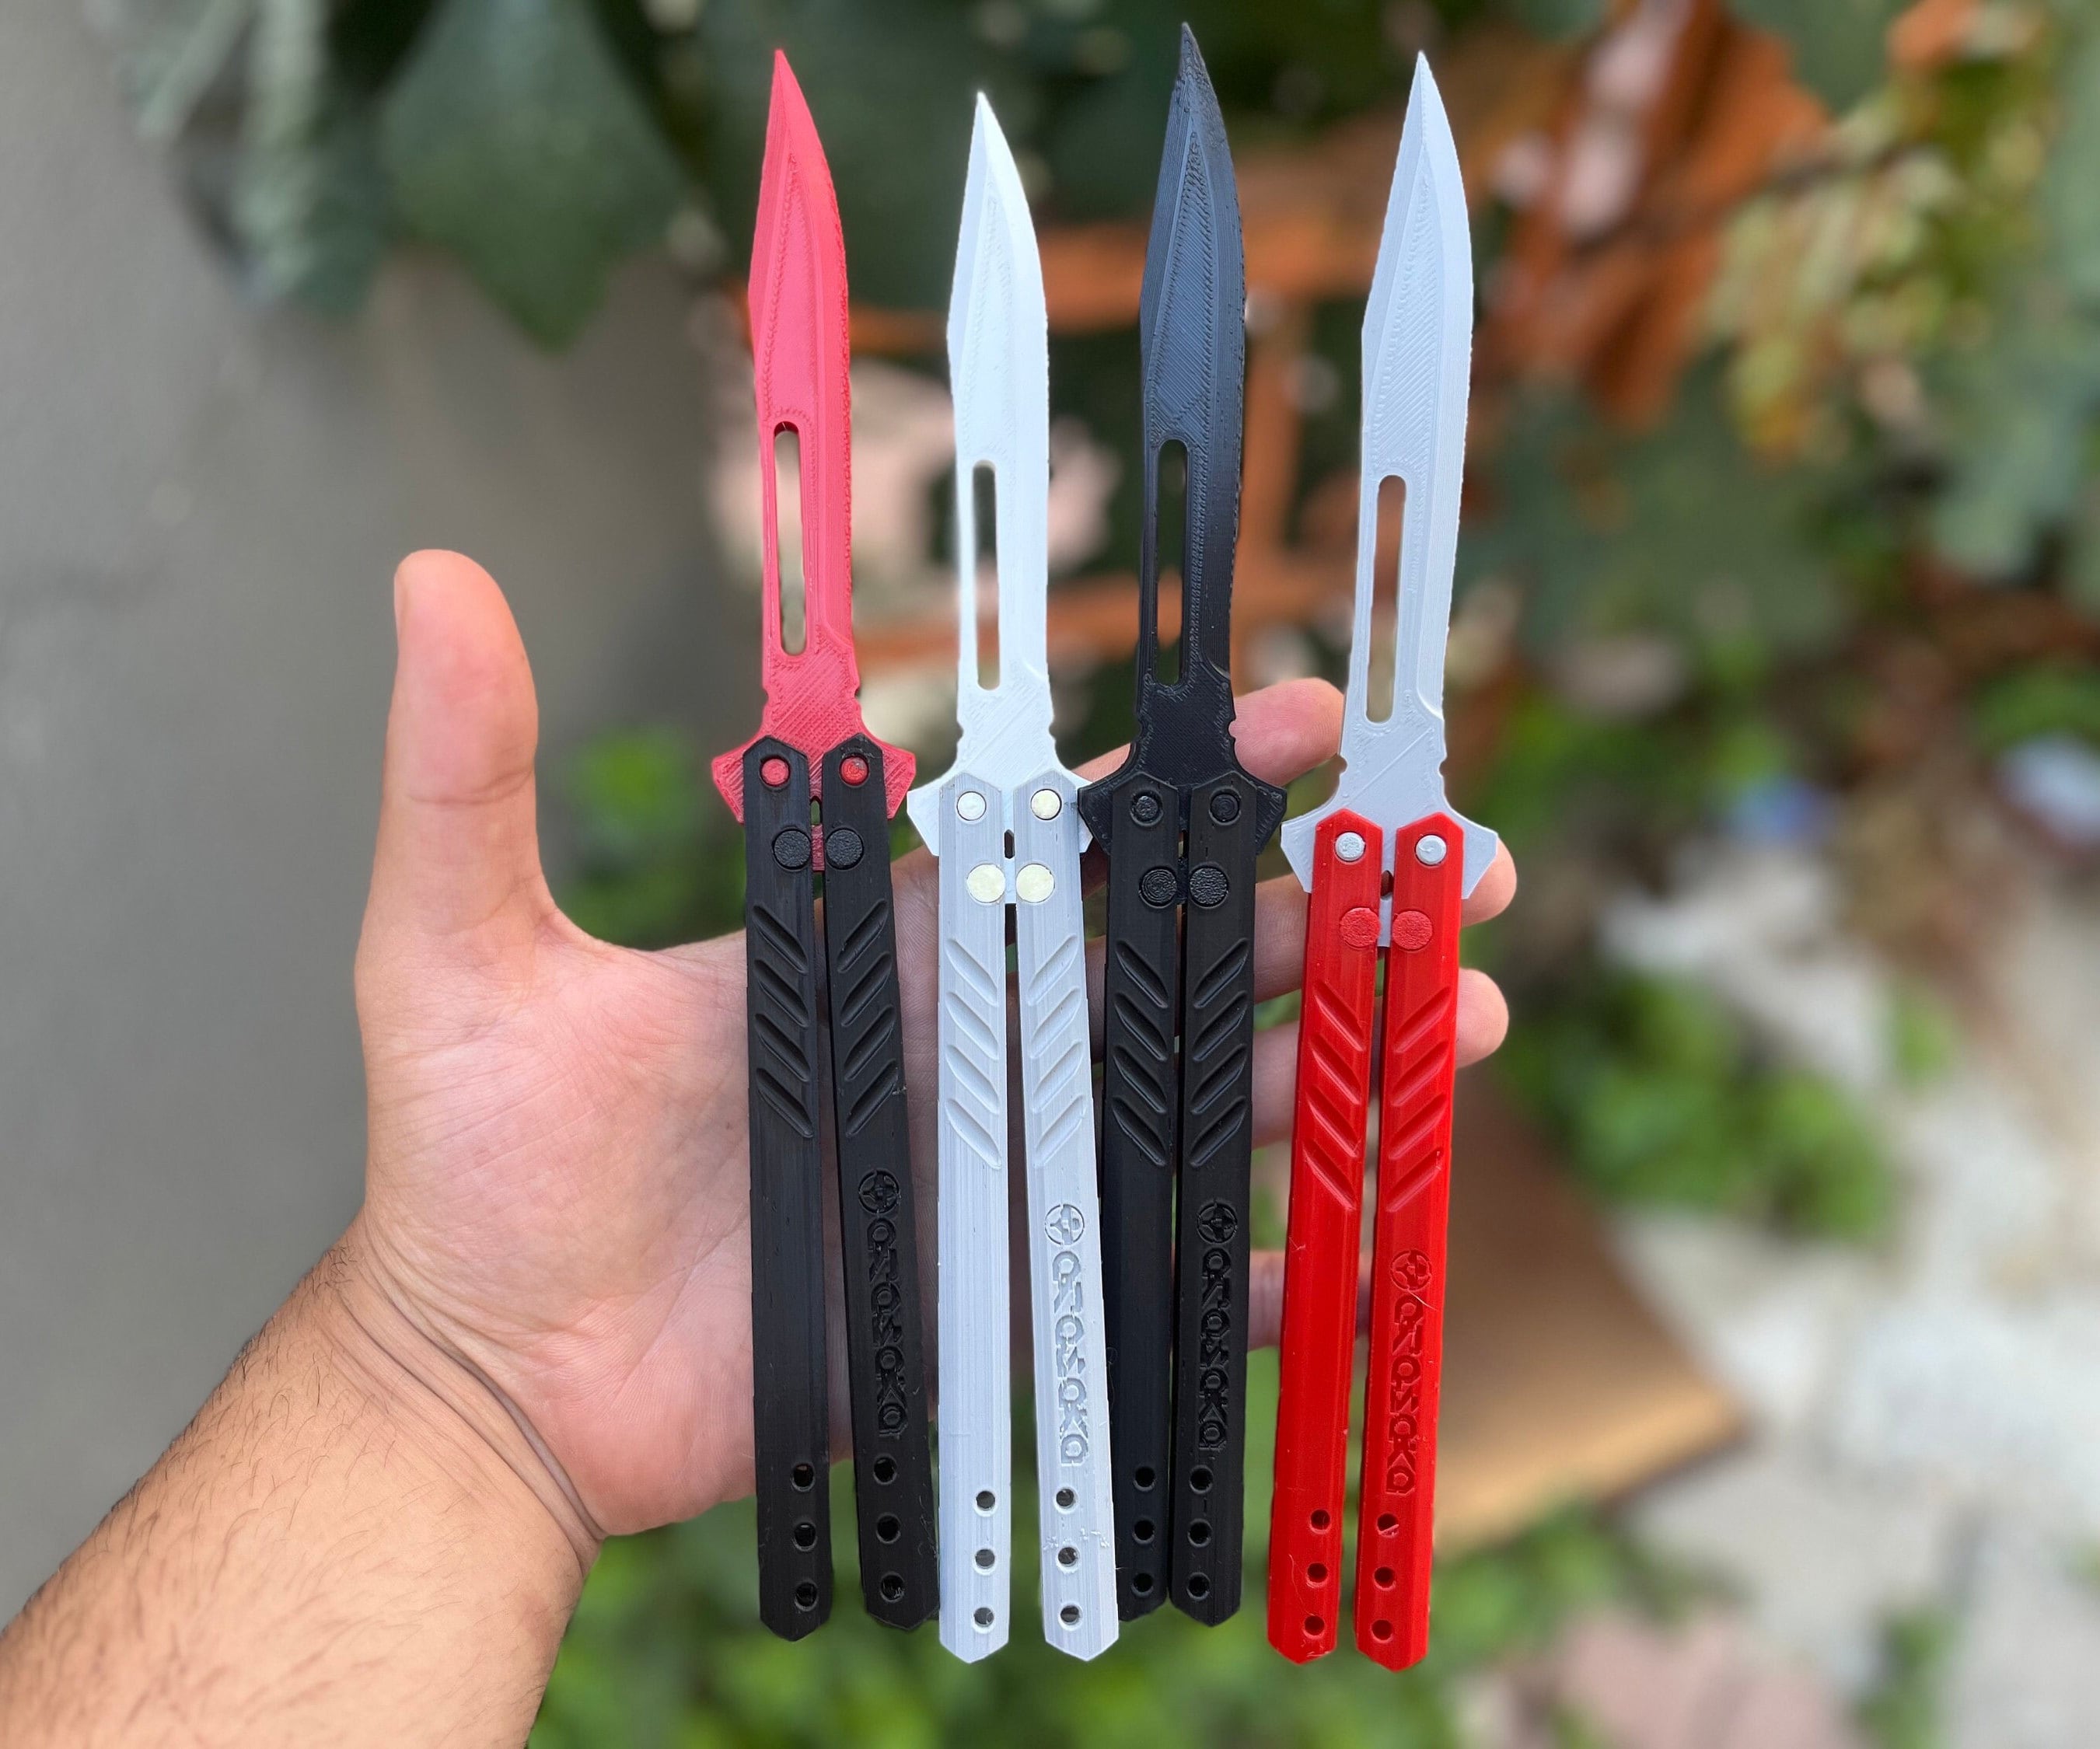 High Quality Styled Butterfly Knife Trainer – Winged Edge